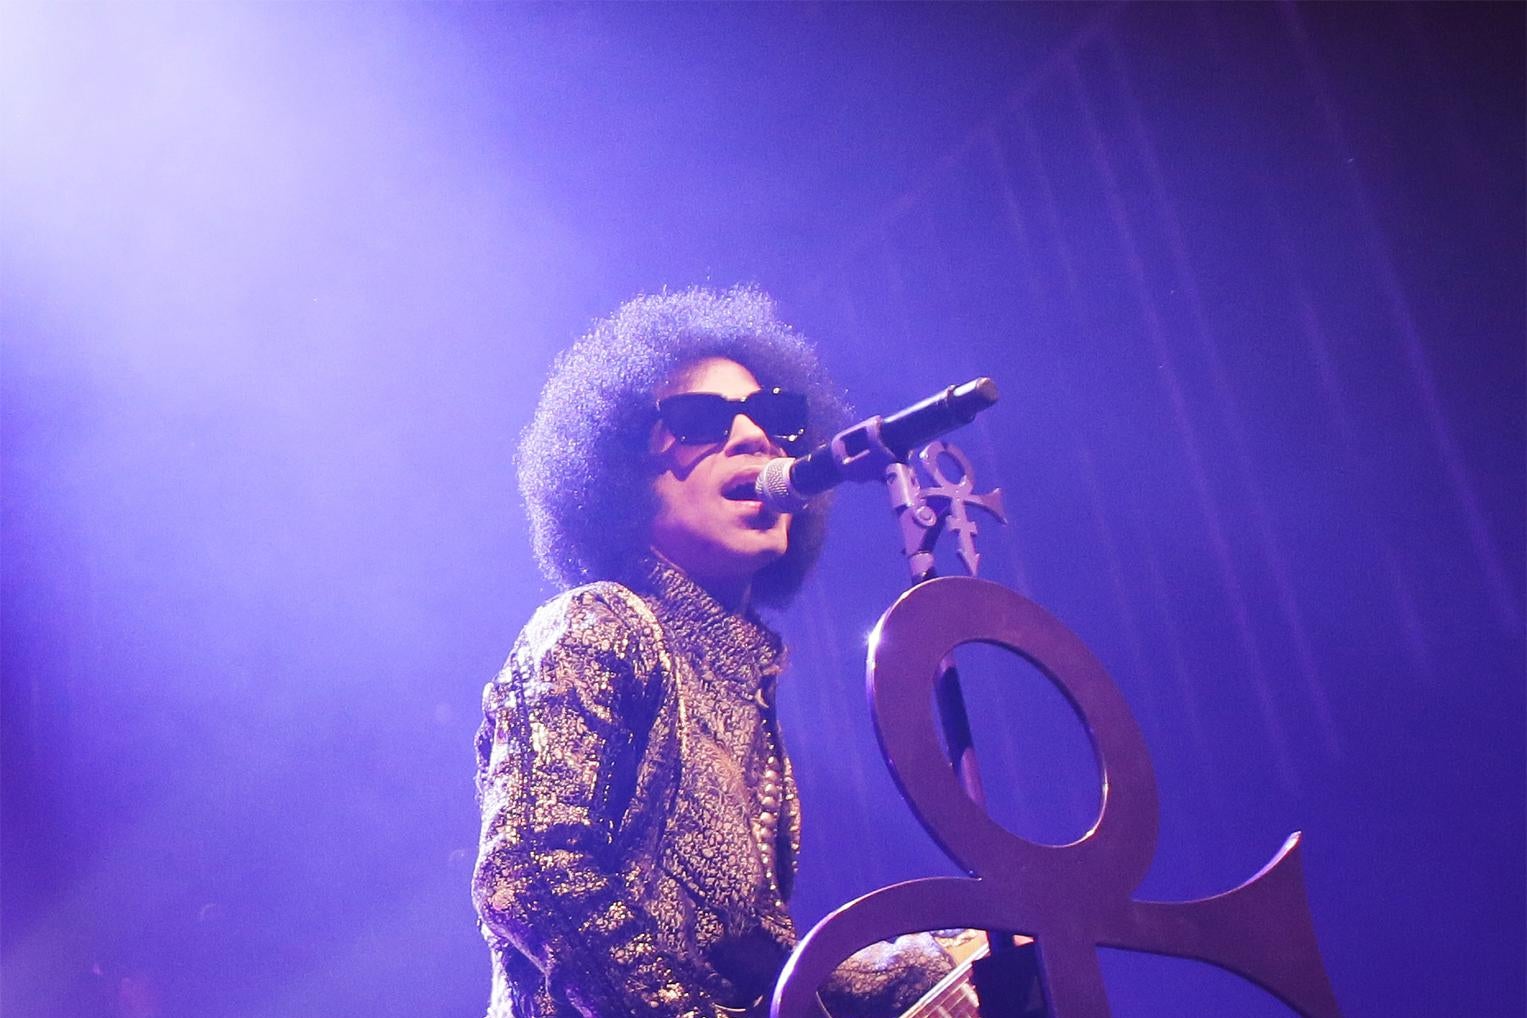 Prince performs in front of a microphone with the Love Symbol, bathed in purple lighting.